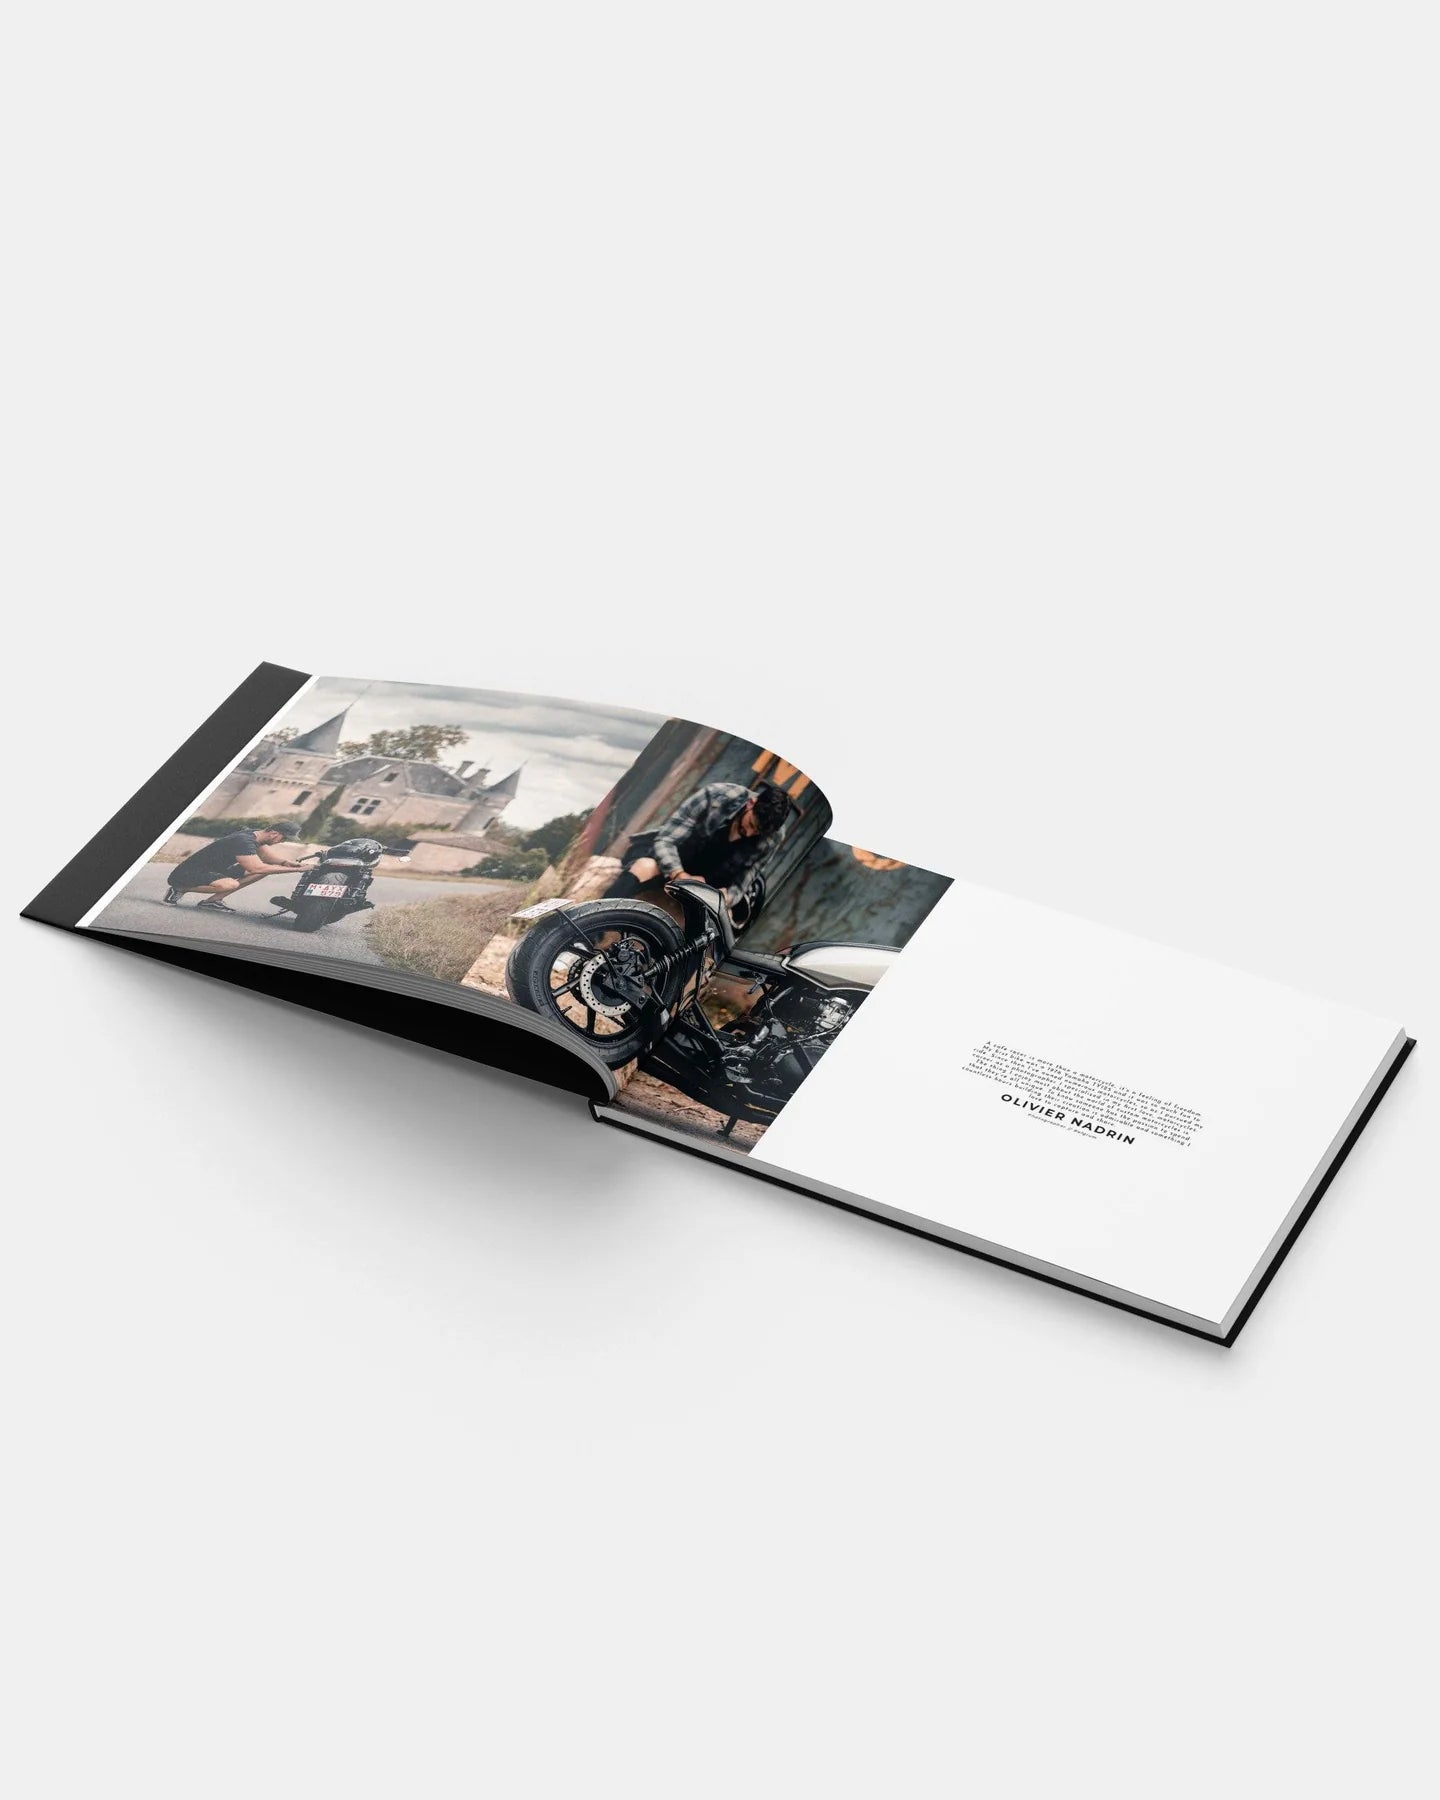 Merla - The Racer Within - Motorcycle Photo Book